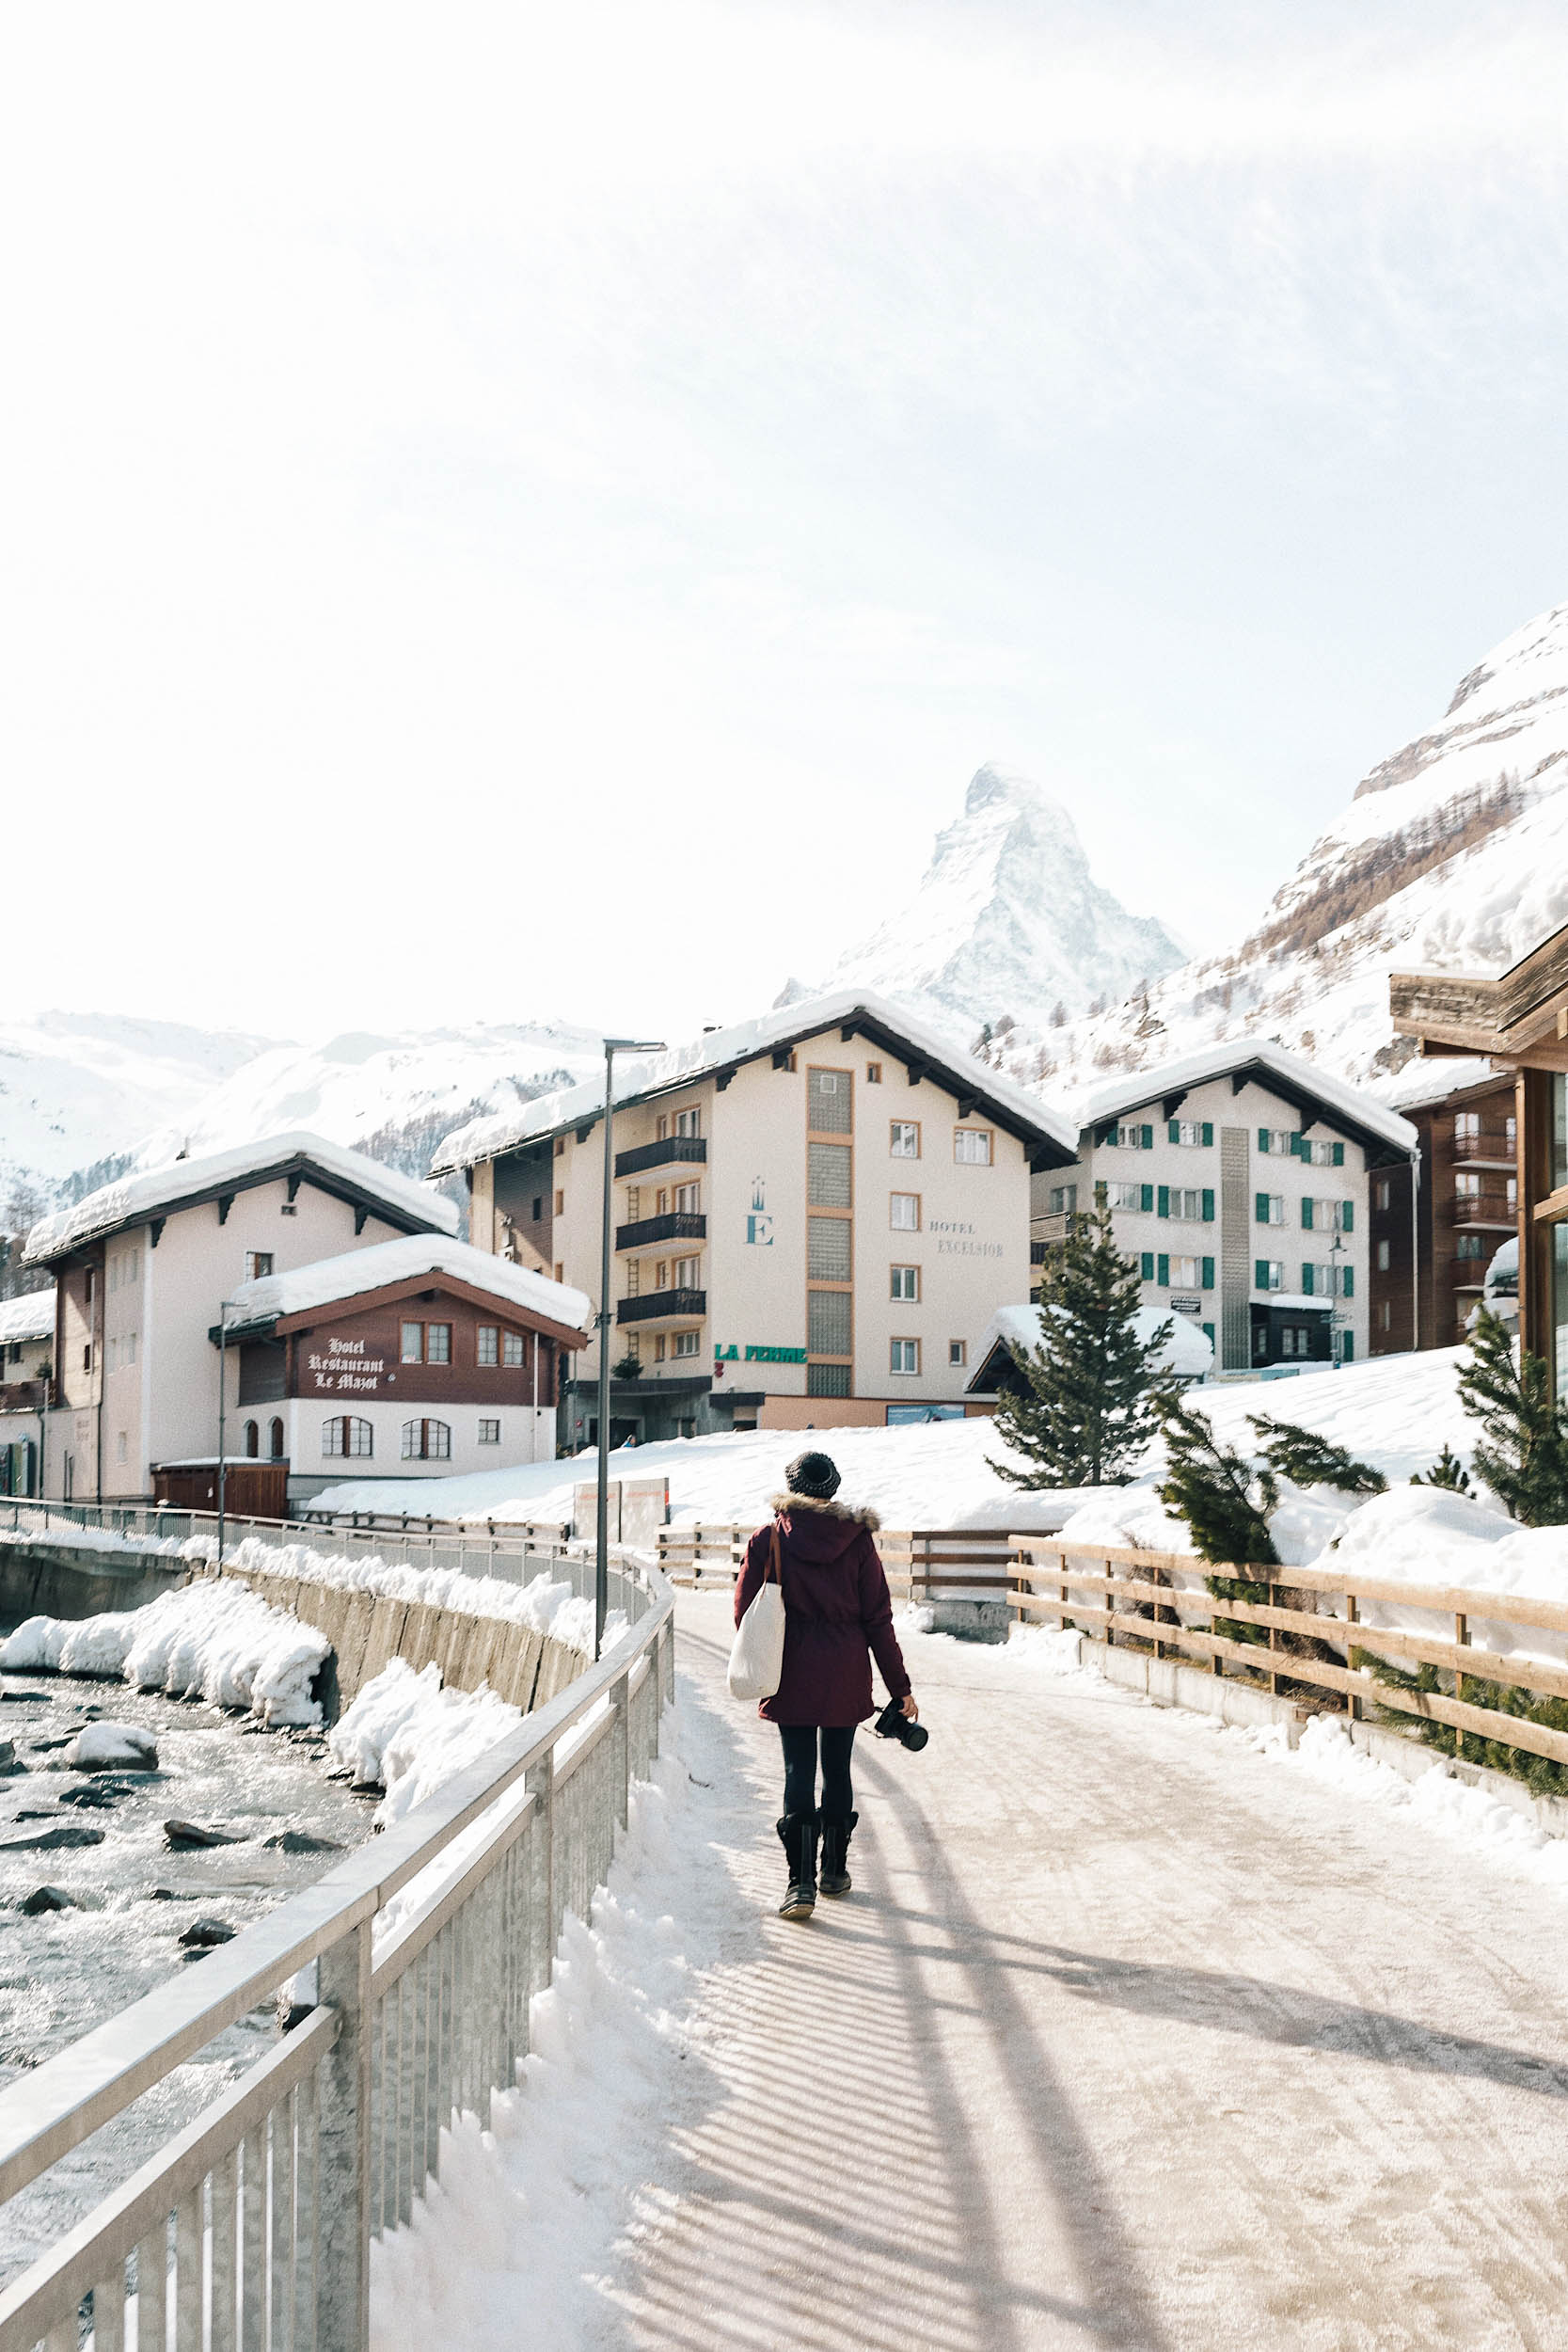 Zermatt is a charming mountain resort town in Switzerland, most widely known for it's skiing, climbing and hiking as well as for it's iconic views of the famous Matterhorn.